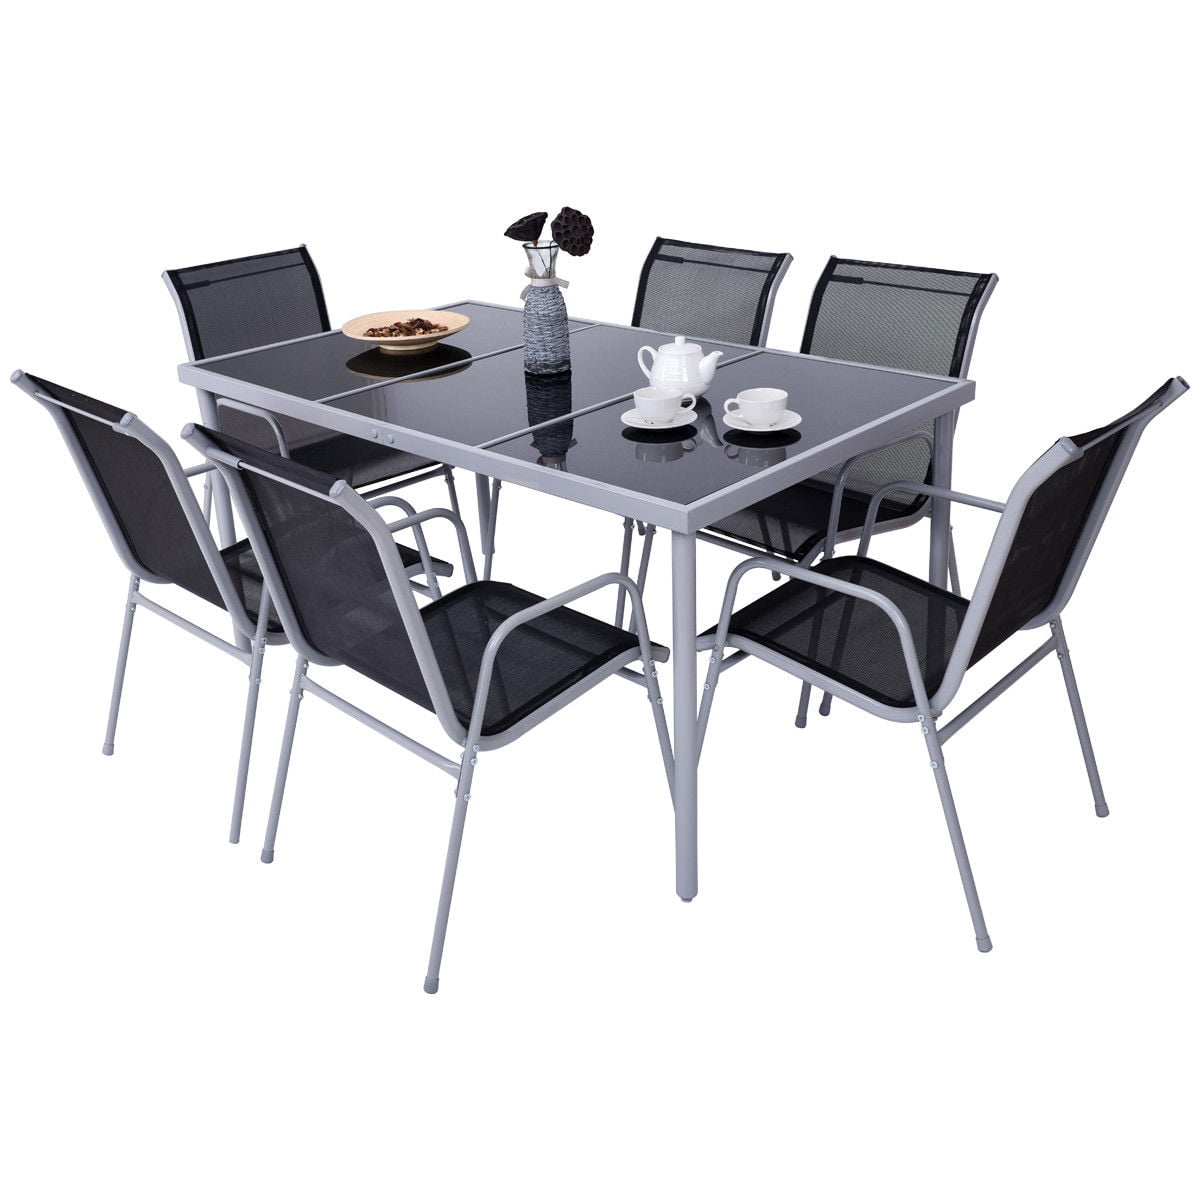 Costway Patio Furniture 7 Piece Steel Table Chairs Dining ...